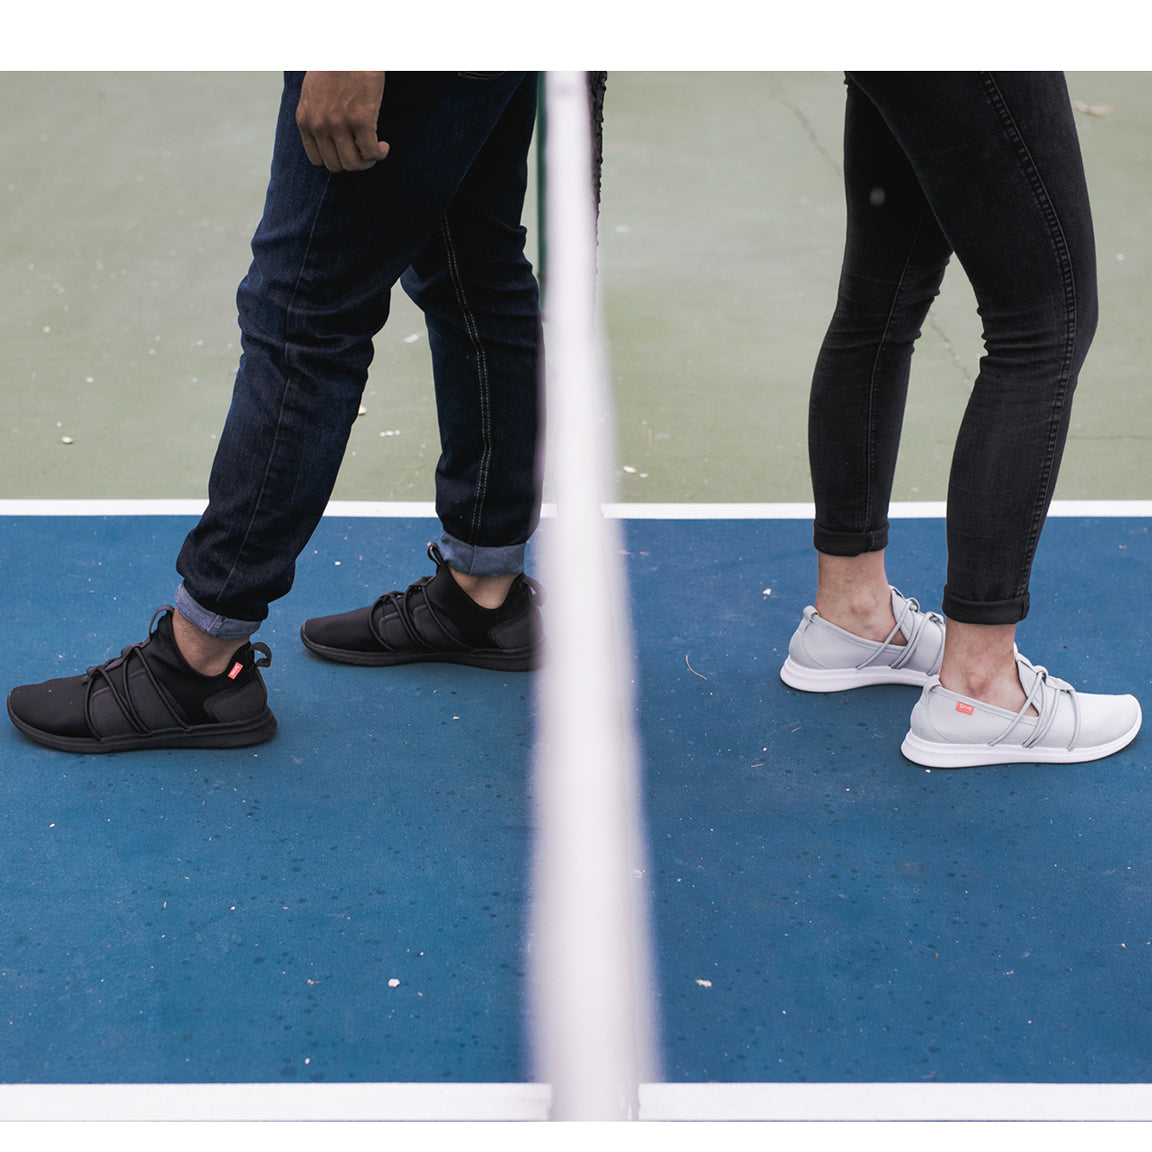 SKYE Footwear | The Original | Athleisure Shoes for Men and Women